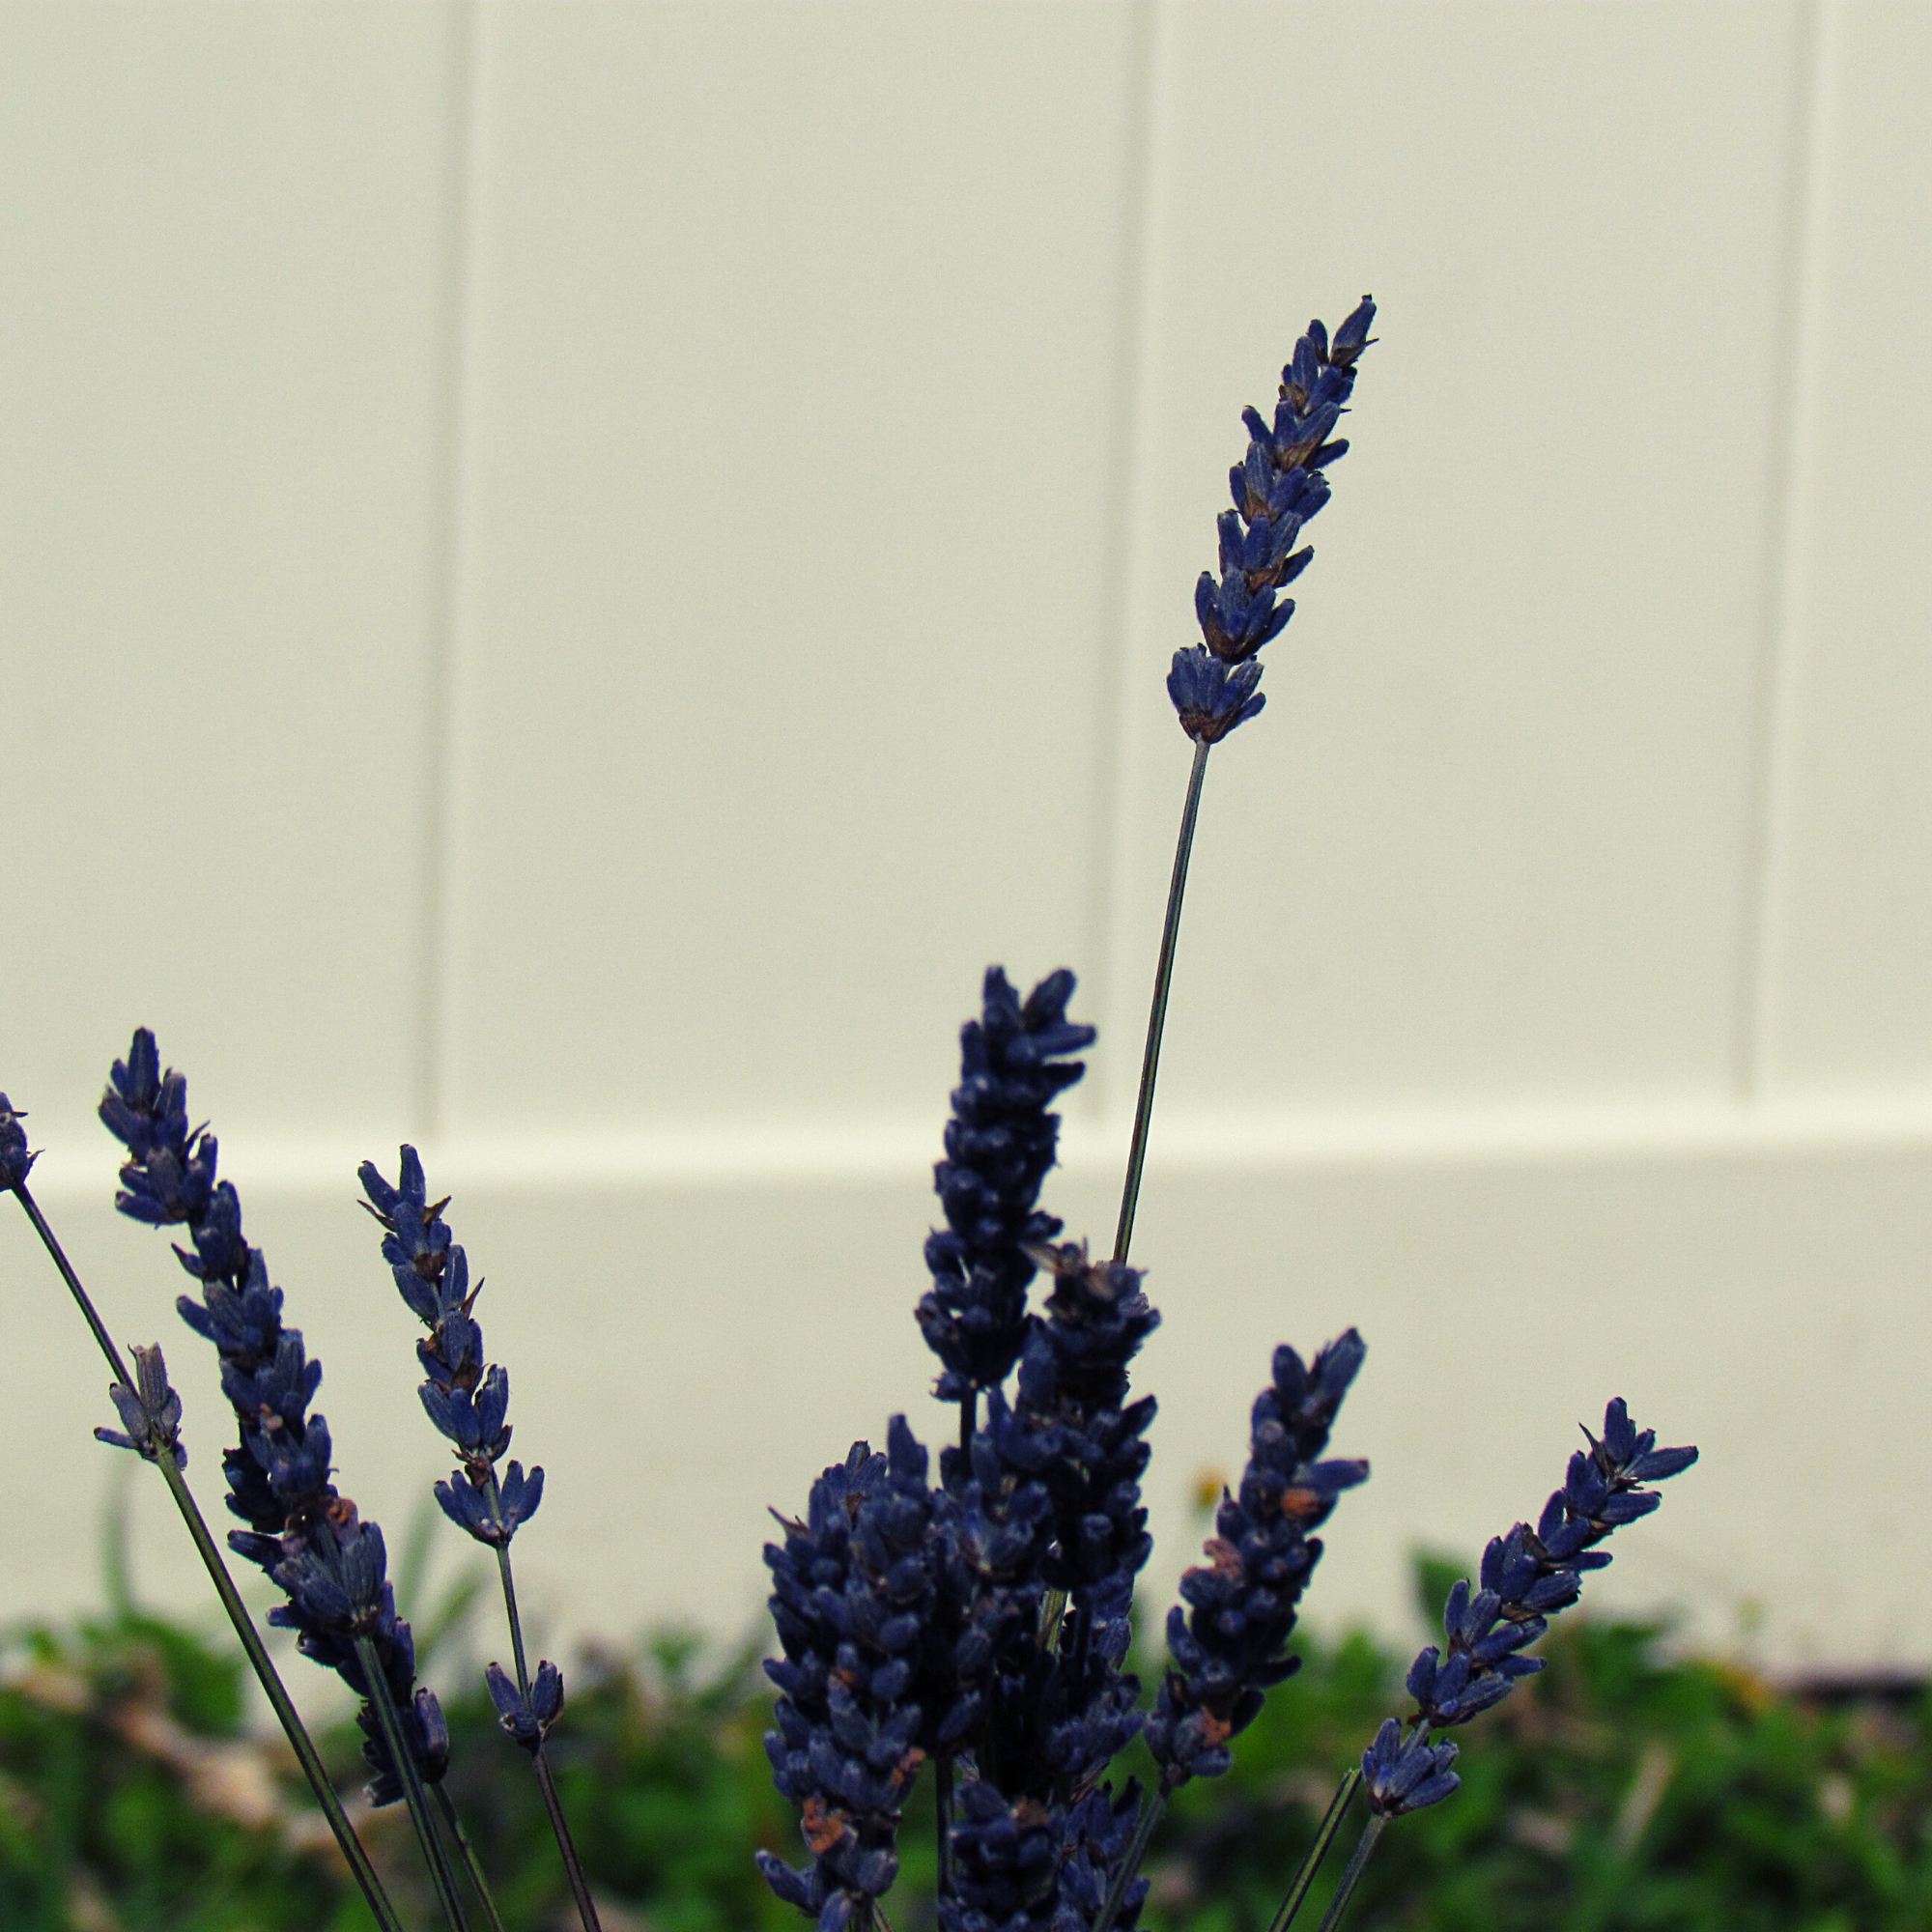 A white picket fence, tall grasses, and purple lavender growing by the fence